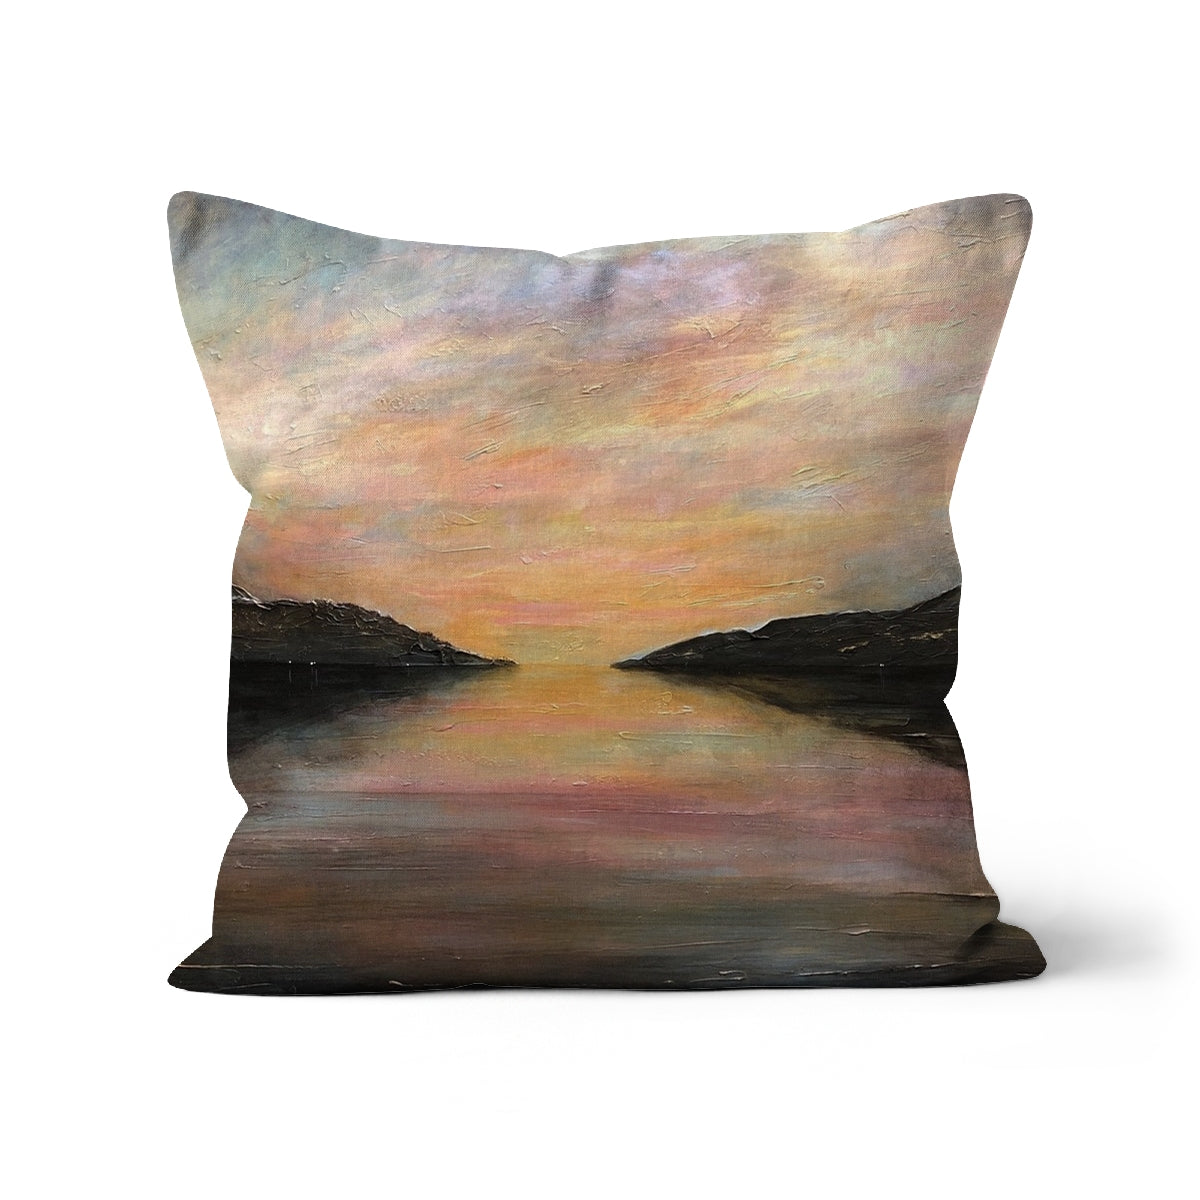 Loch Ness Glow Art Gifts Cushion-Cushions-Scottish Lochs & Mountains Art Gallery-Linen-12"x12"-Paintings, Prints, Homeware, Art Gifts From Scotland By Scottish Artist Kevin Hunter